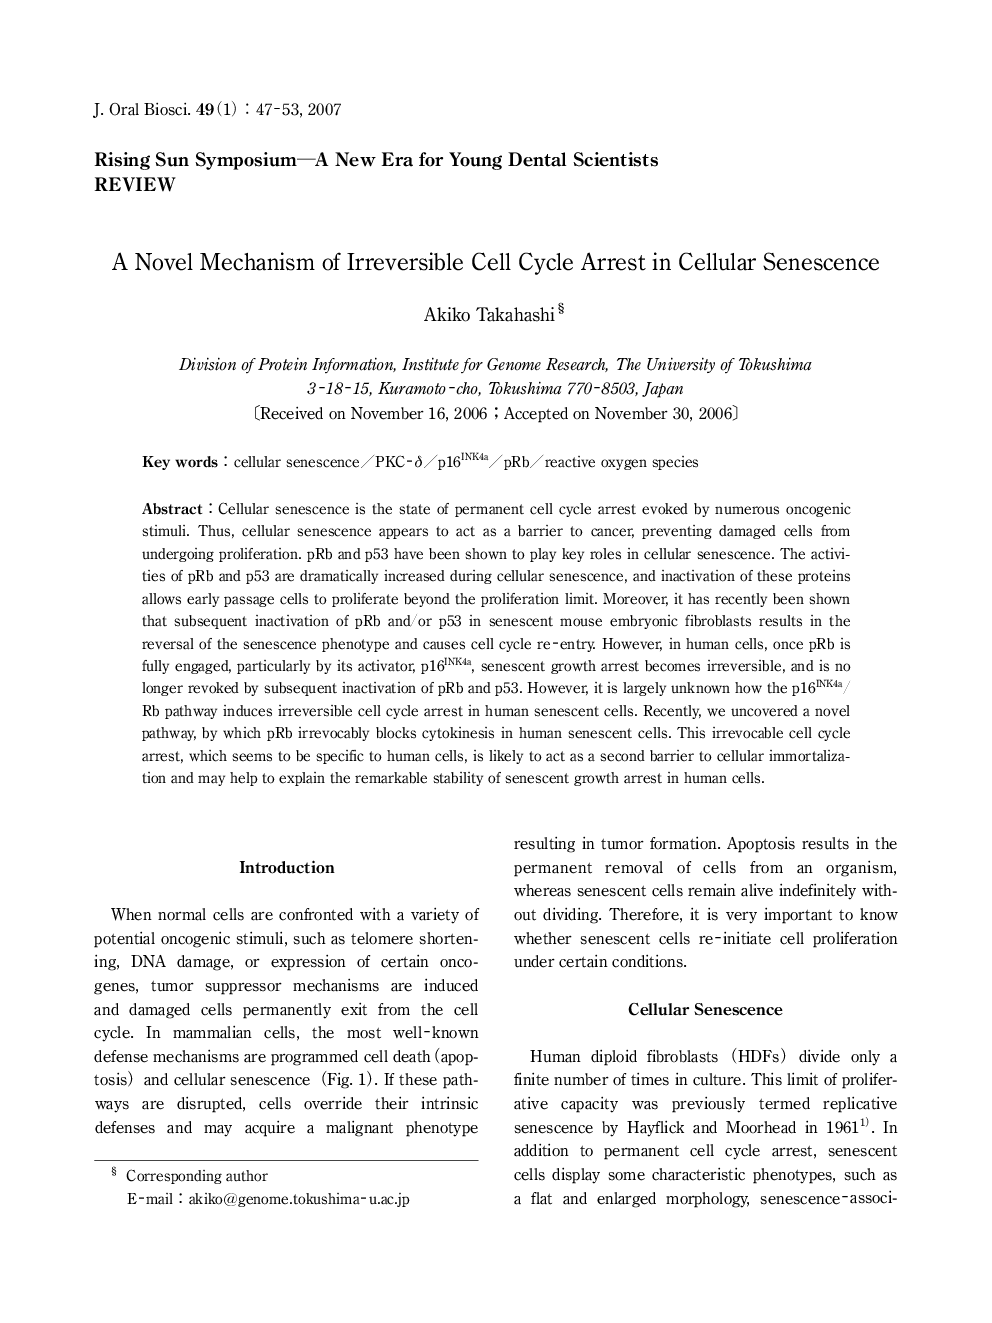 A Novel Mechanism of Irreversible Cell Cycle Arrest in Cellular Senescence